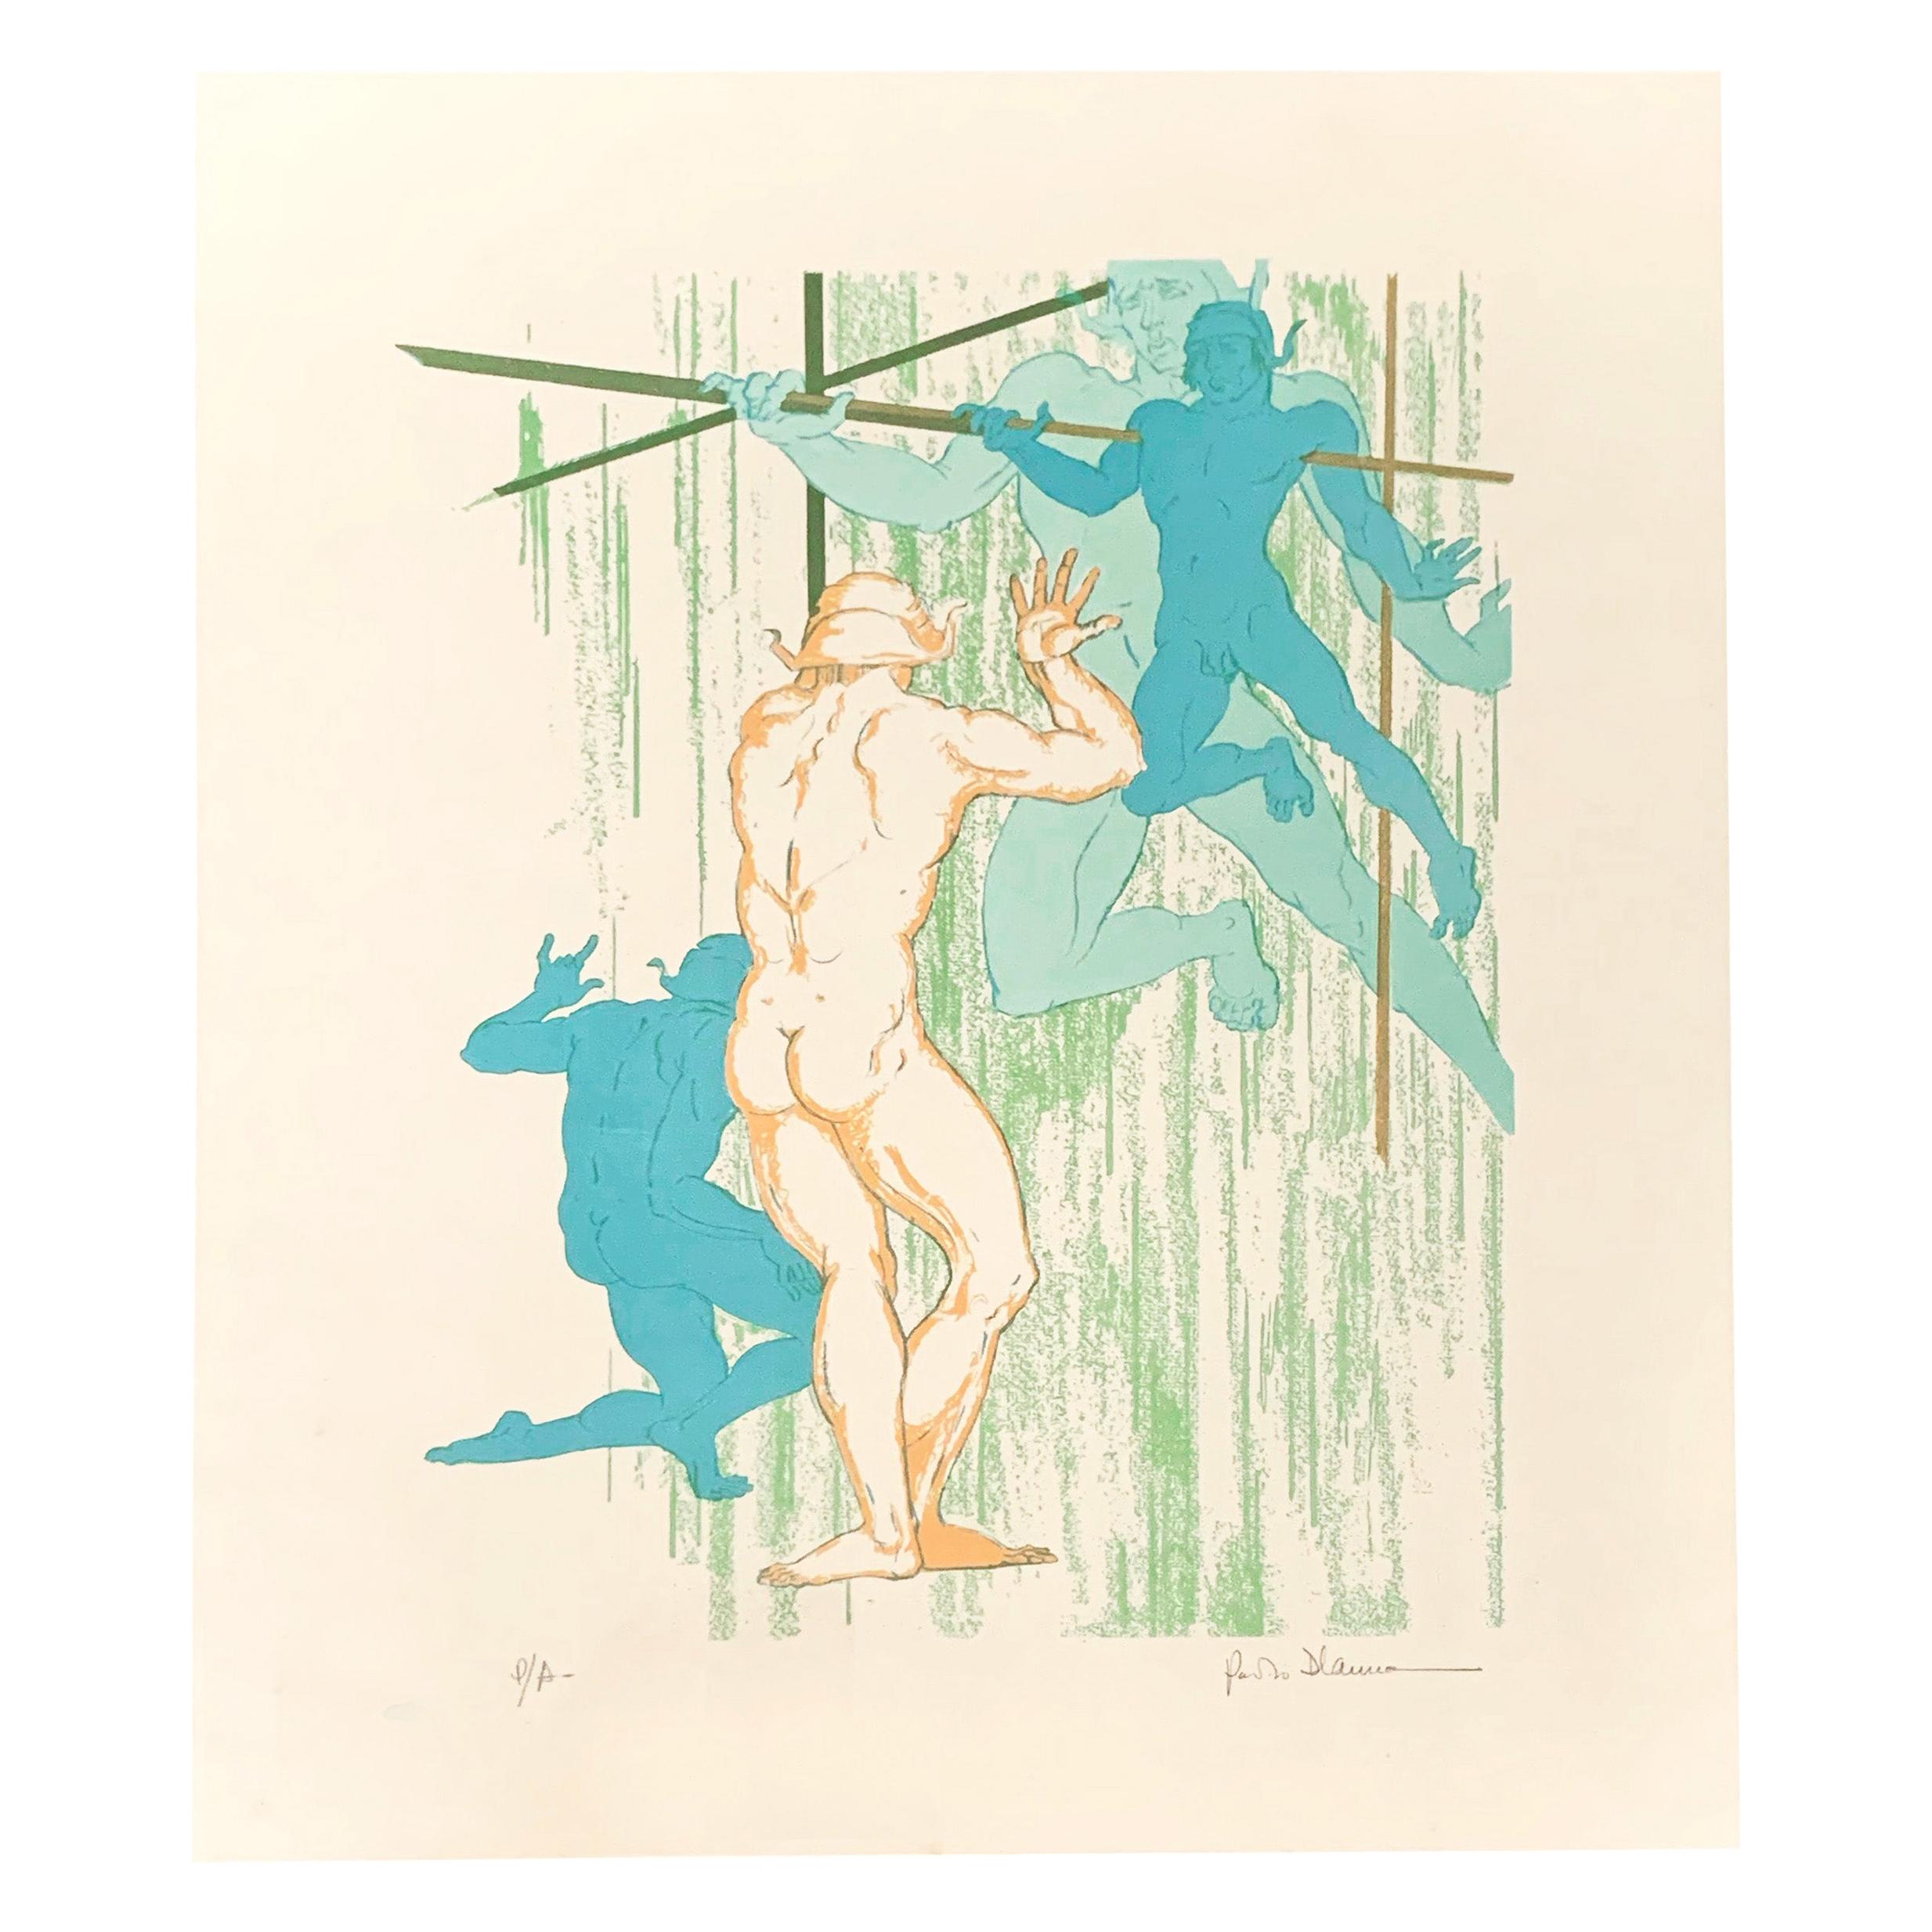 "Nude Dancers, " Rare Midcentury Color Print with Male Nudes by D'Anna